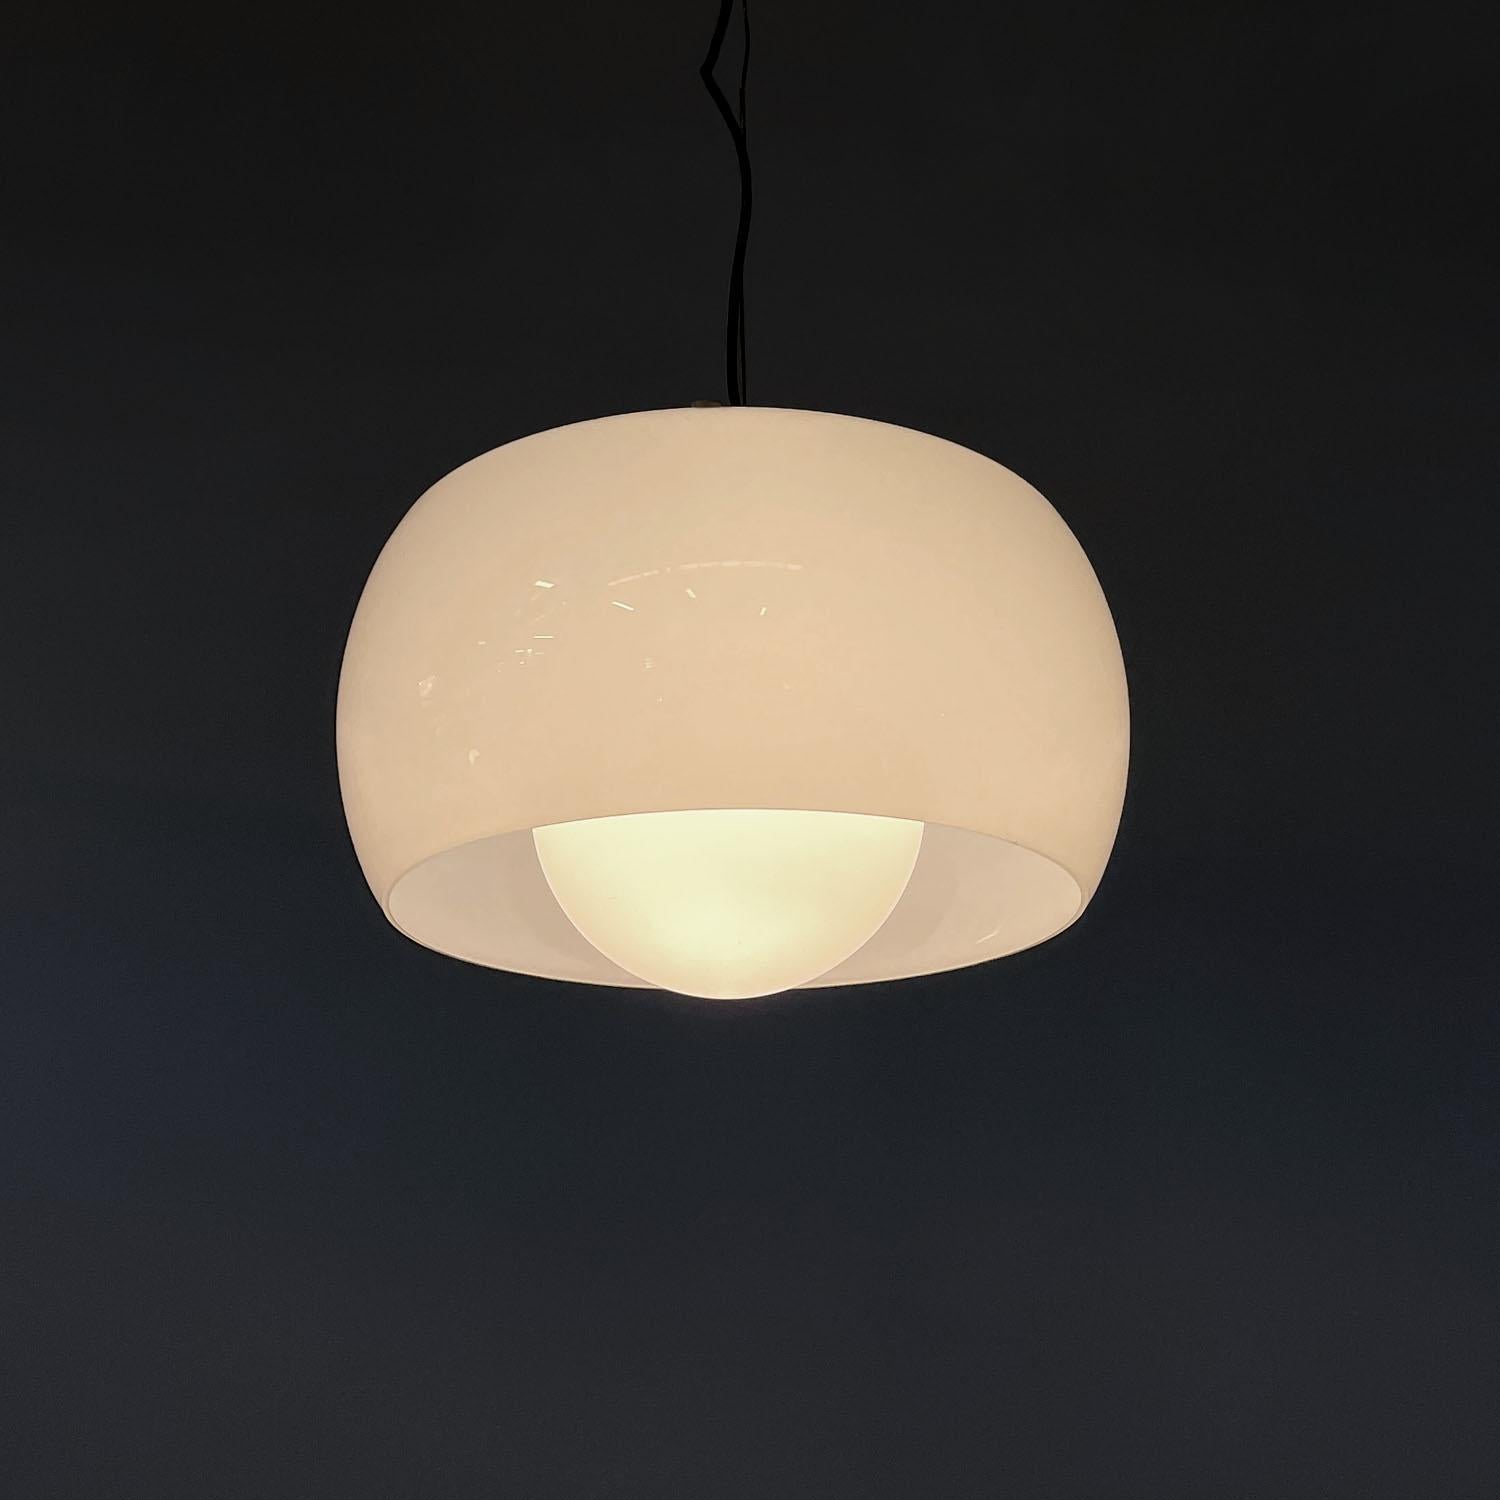 Italian mid-century modern ceiling lamp Omega Vico Magistretti Artemide, 1960s
Chandelier mod. Omega with round lampshade. The ceiling attachment is made of bronzed nickel-plated metal, from here starts the metal cable at the end of which is the